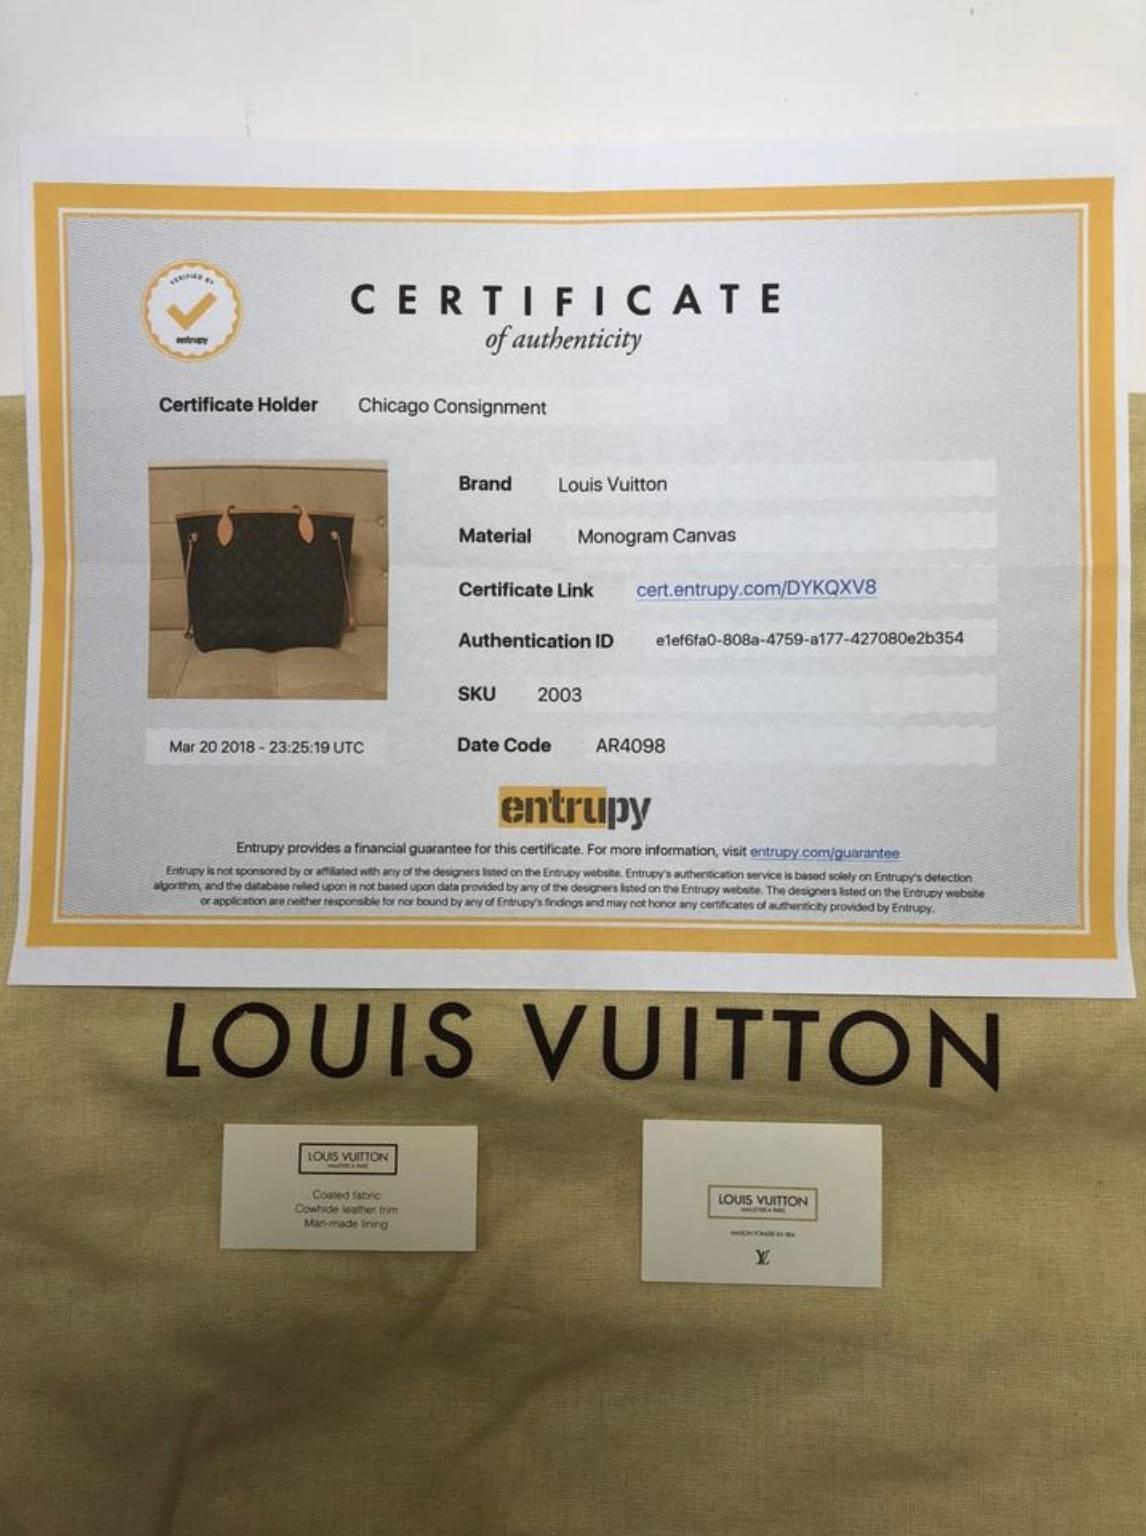 MODEL - Louis Vuitton Monogram Neverfull MM

CONDITION - Exceptional. Light to medium vachette with no watermarks, no dryness and no cracking. Bright and shiny hardware with no tarnishing or chipping. No rips, holes, tears, stains or odors. Piece